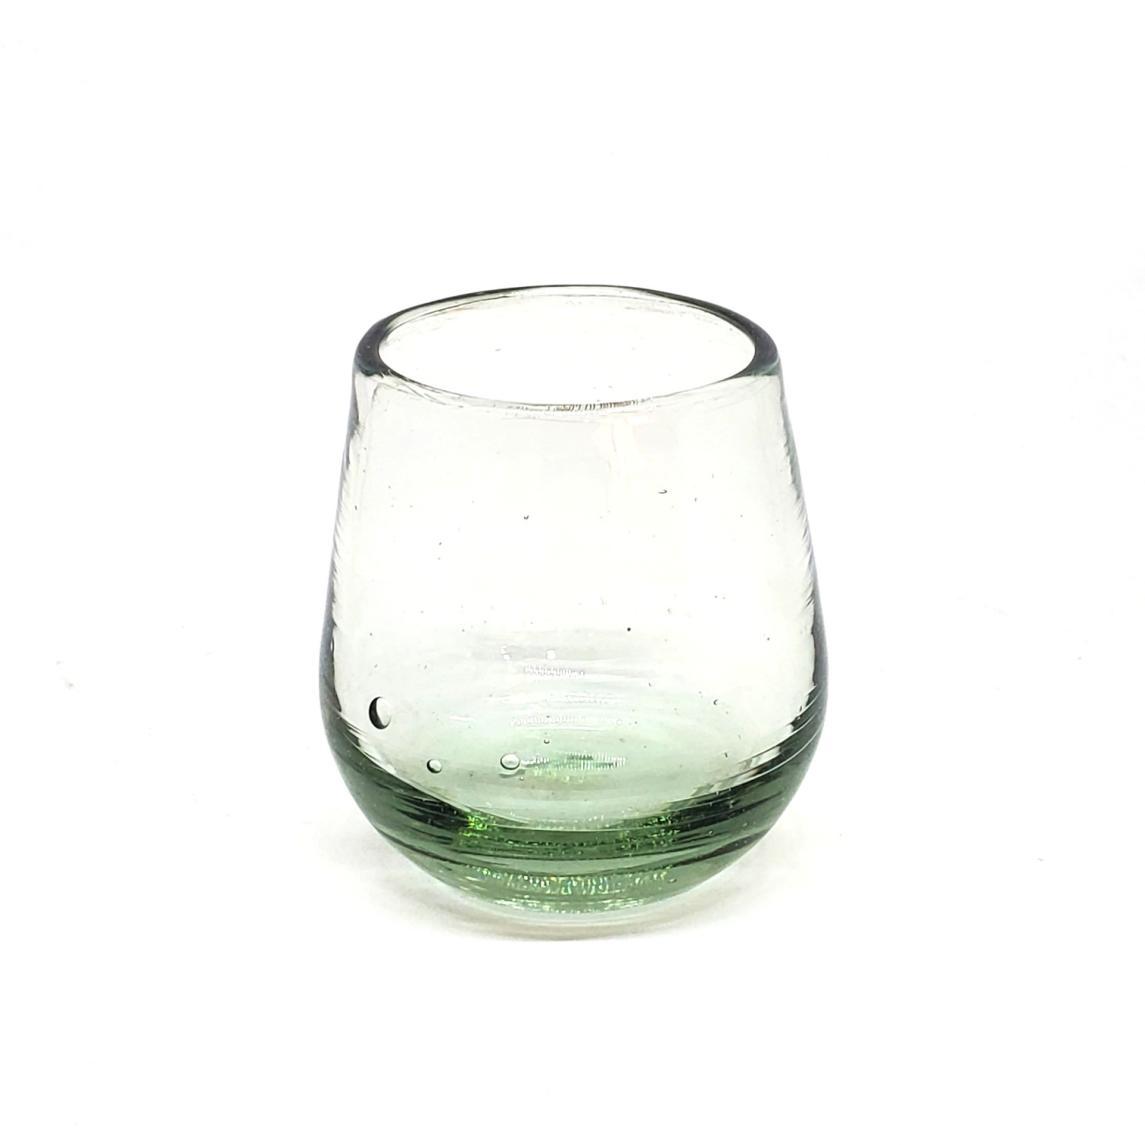 MEXICAN GLASSWARE / Clear 6 oz Roly Poly Glasses (set of 6) / Our Clear Blown Glasses are individually handcrafted from recycled glass, making each of them unique works of art.